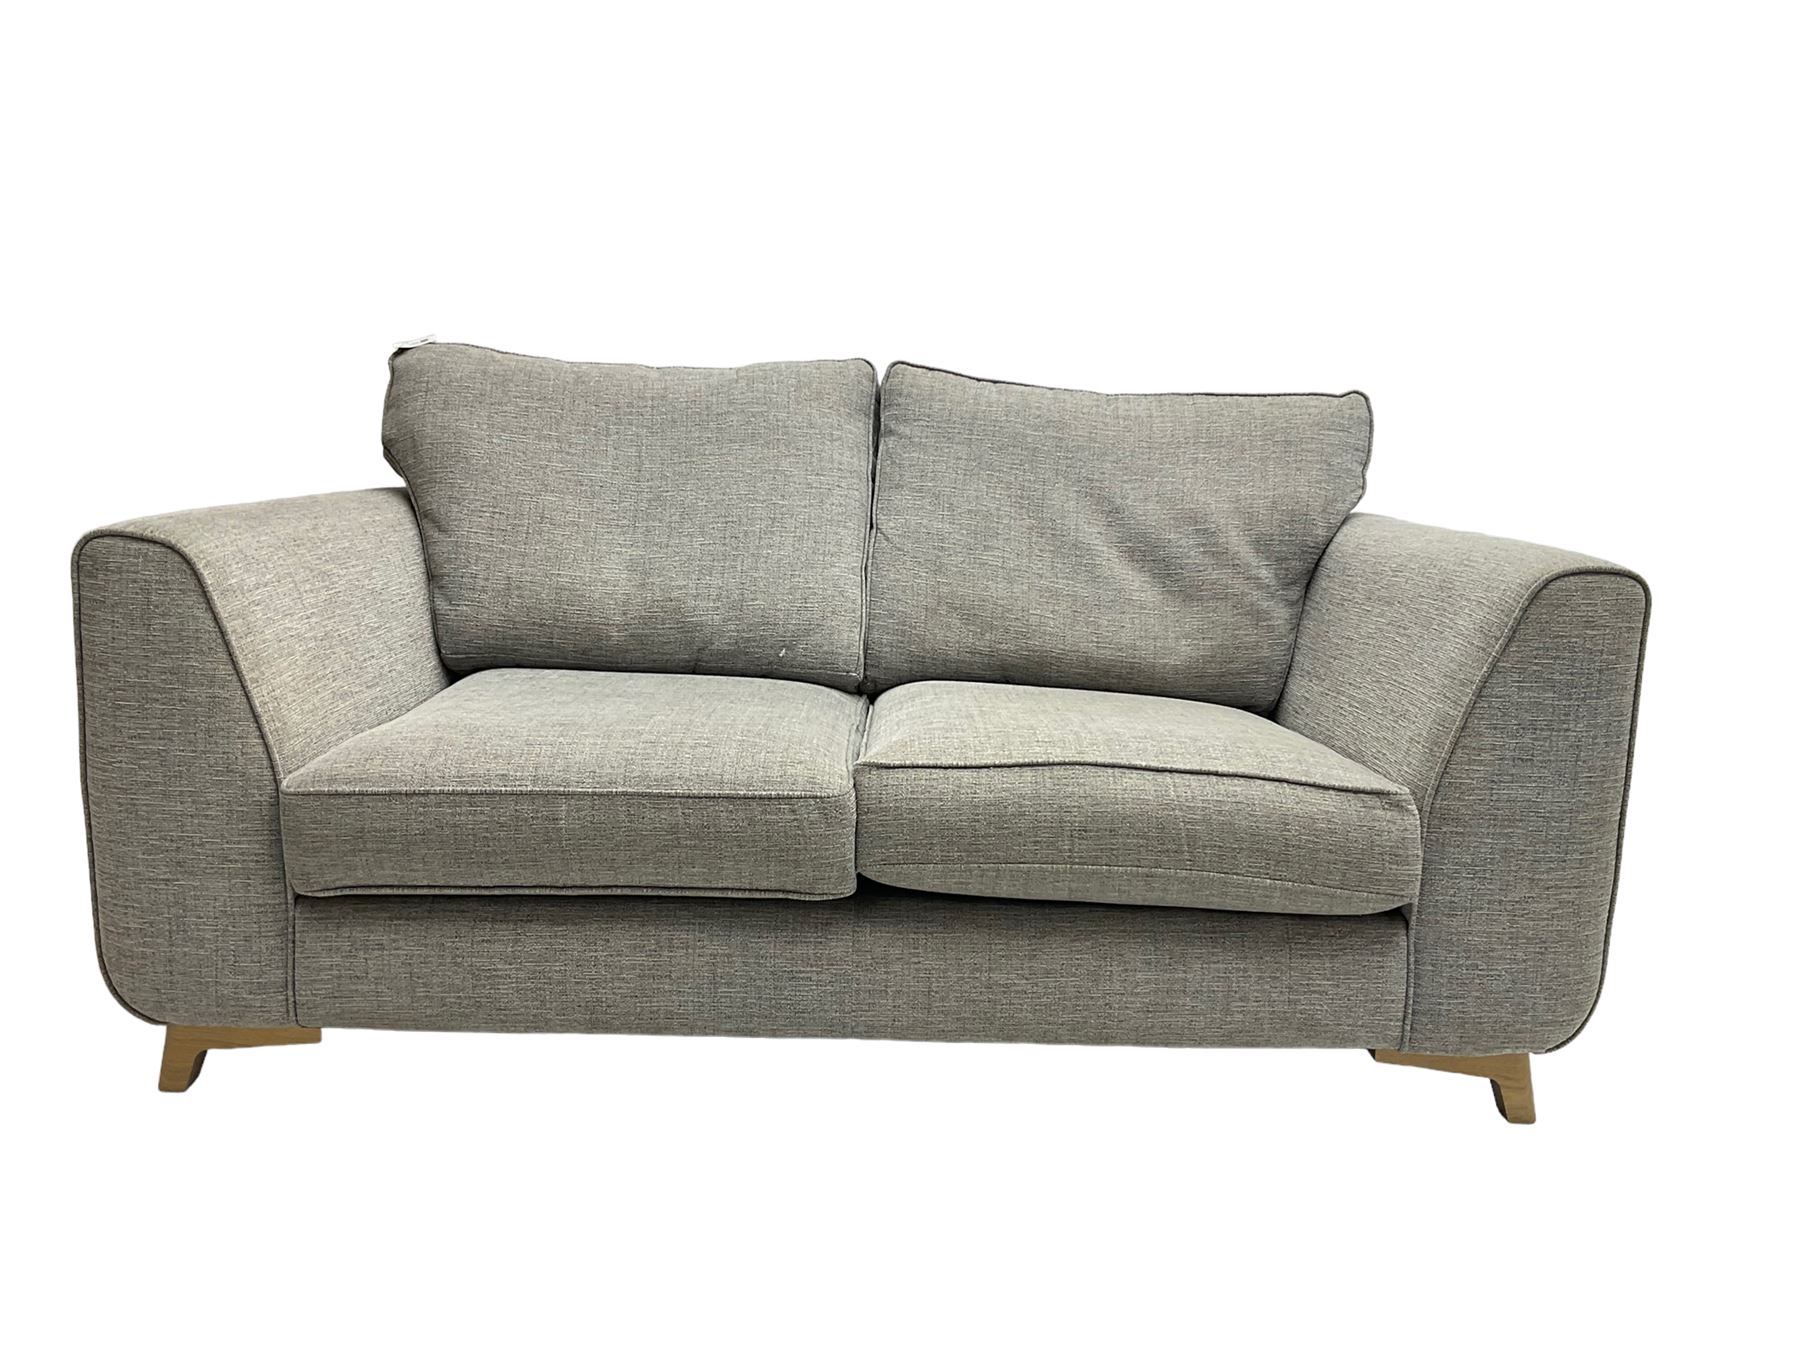 Two seat sofa upholstered in graphite grey fabric - Image 6 of 7